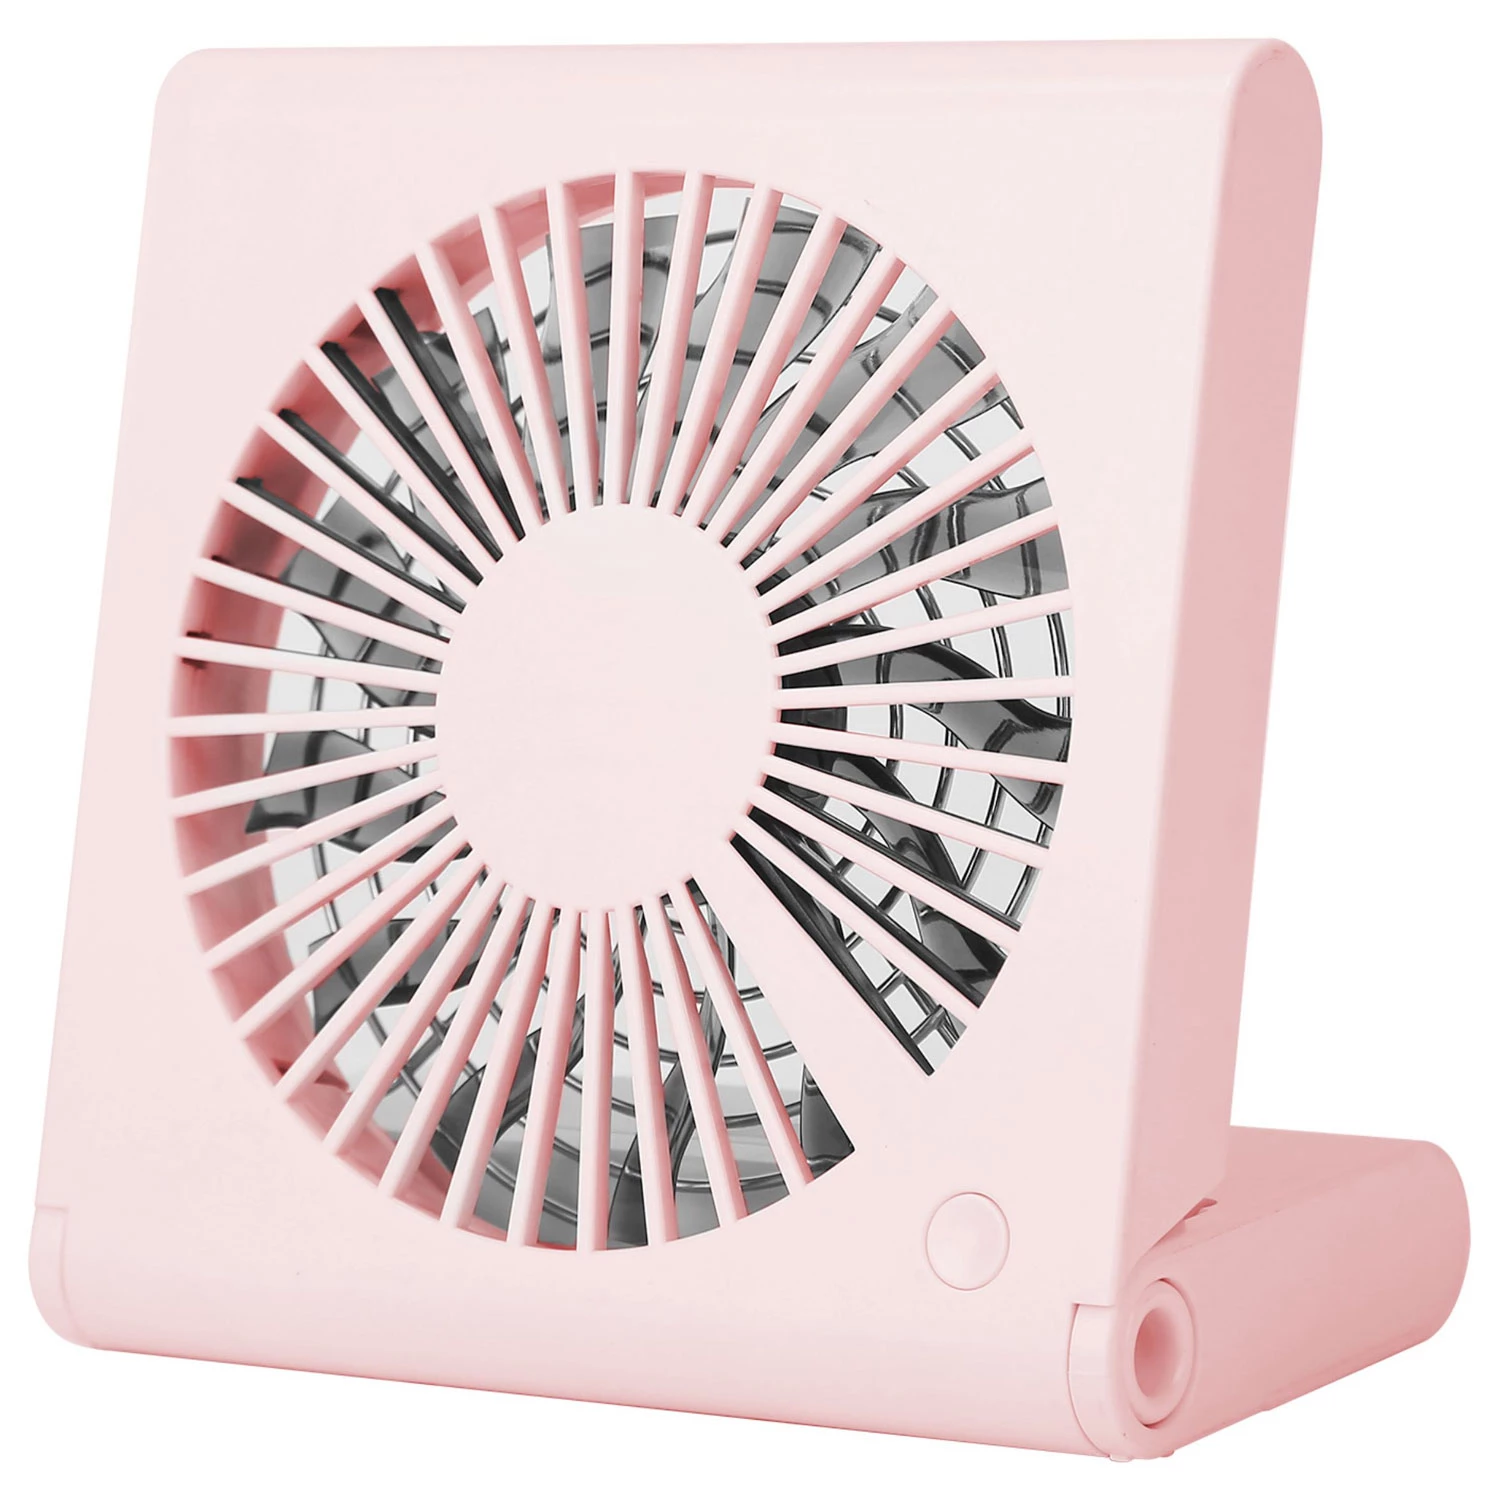 Portable USB Rechargeable Desk Fan - Low Noise, 3 Speeds, Battery Operated - Ideal for Office